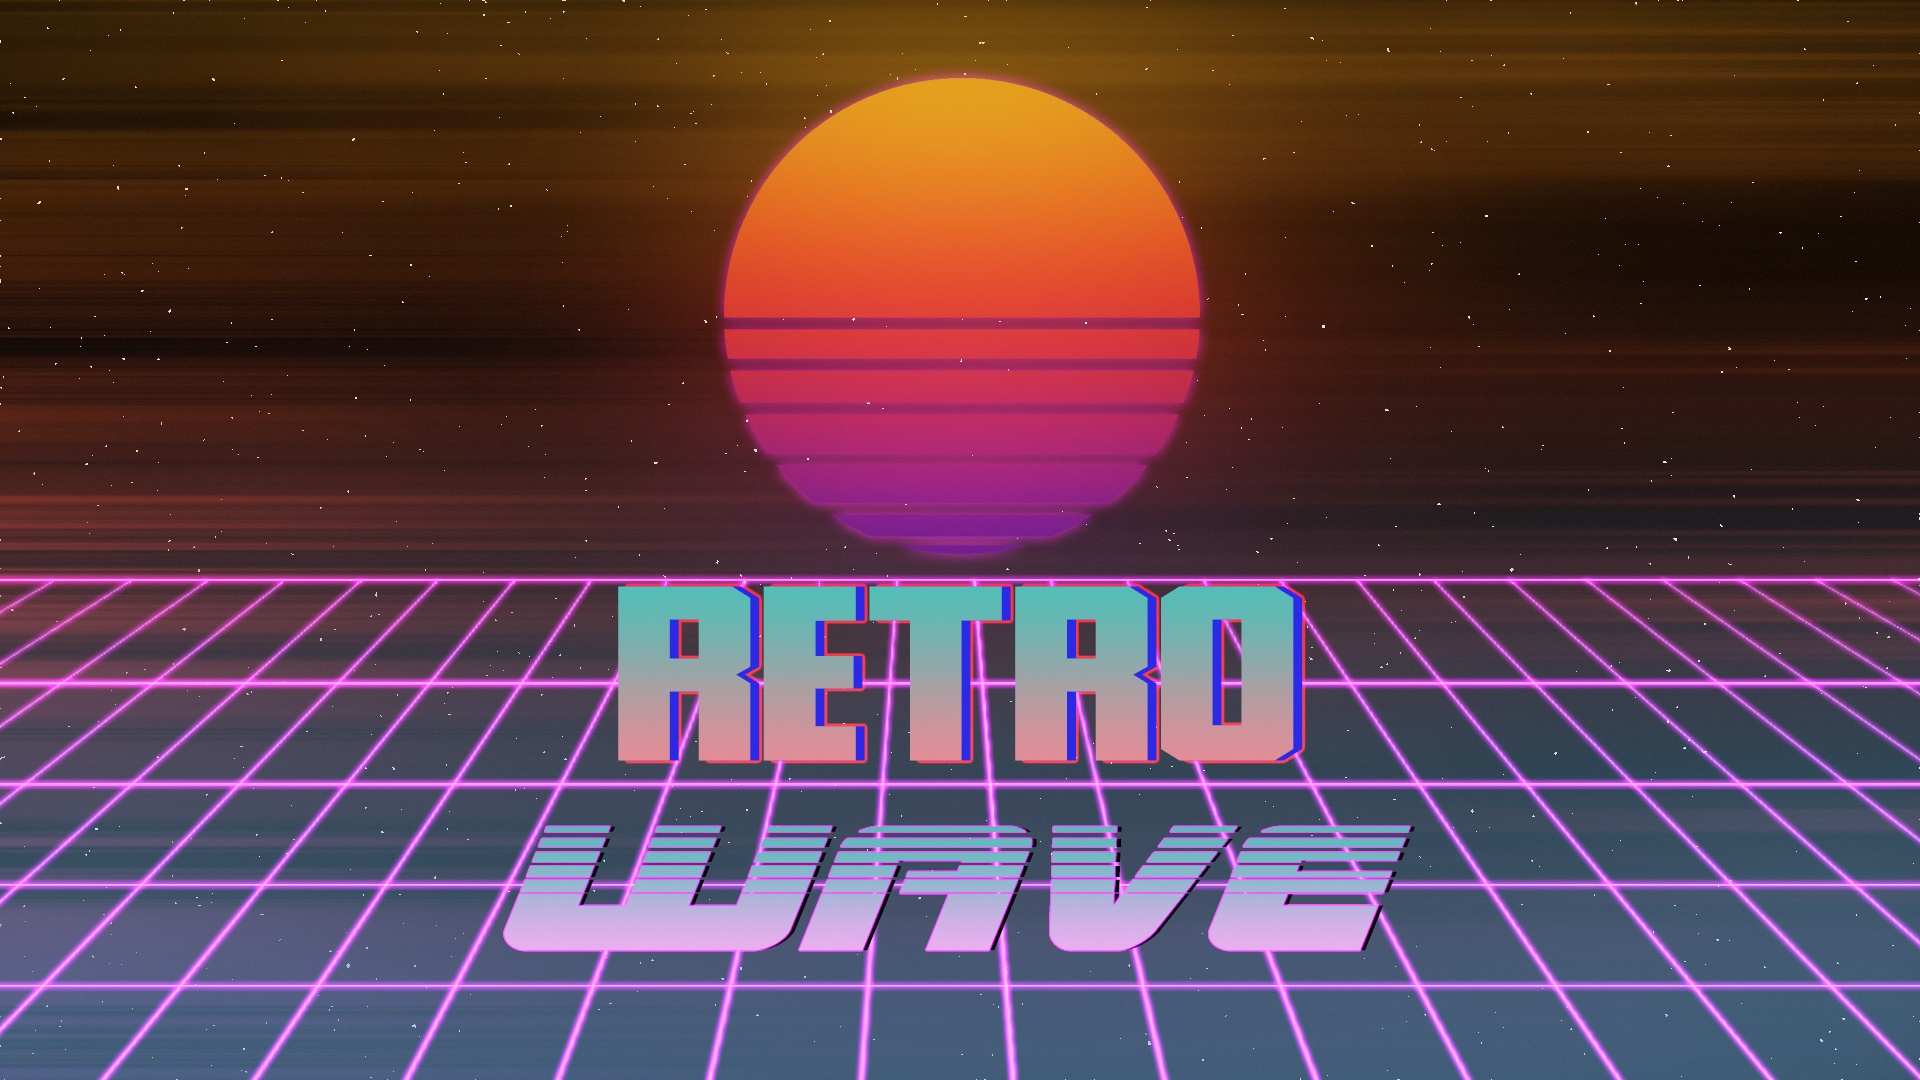 Retrowave and sun wallpaper - backiee